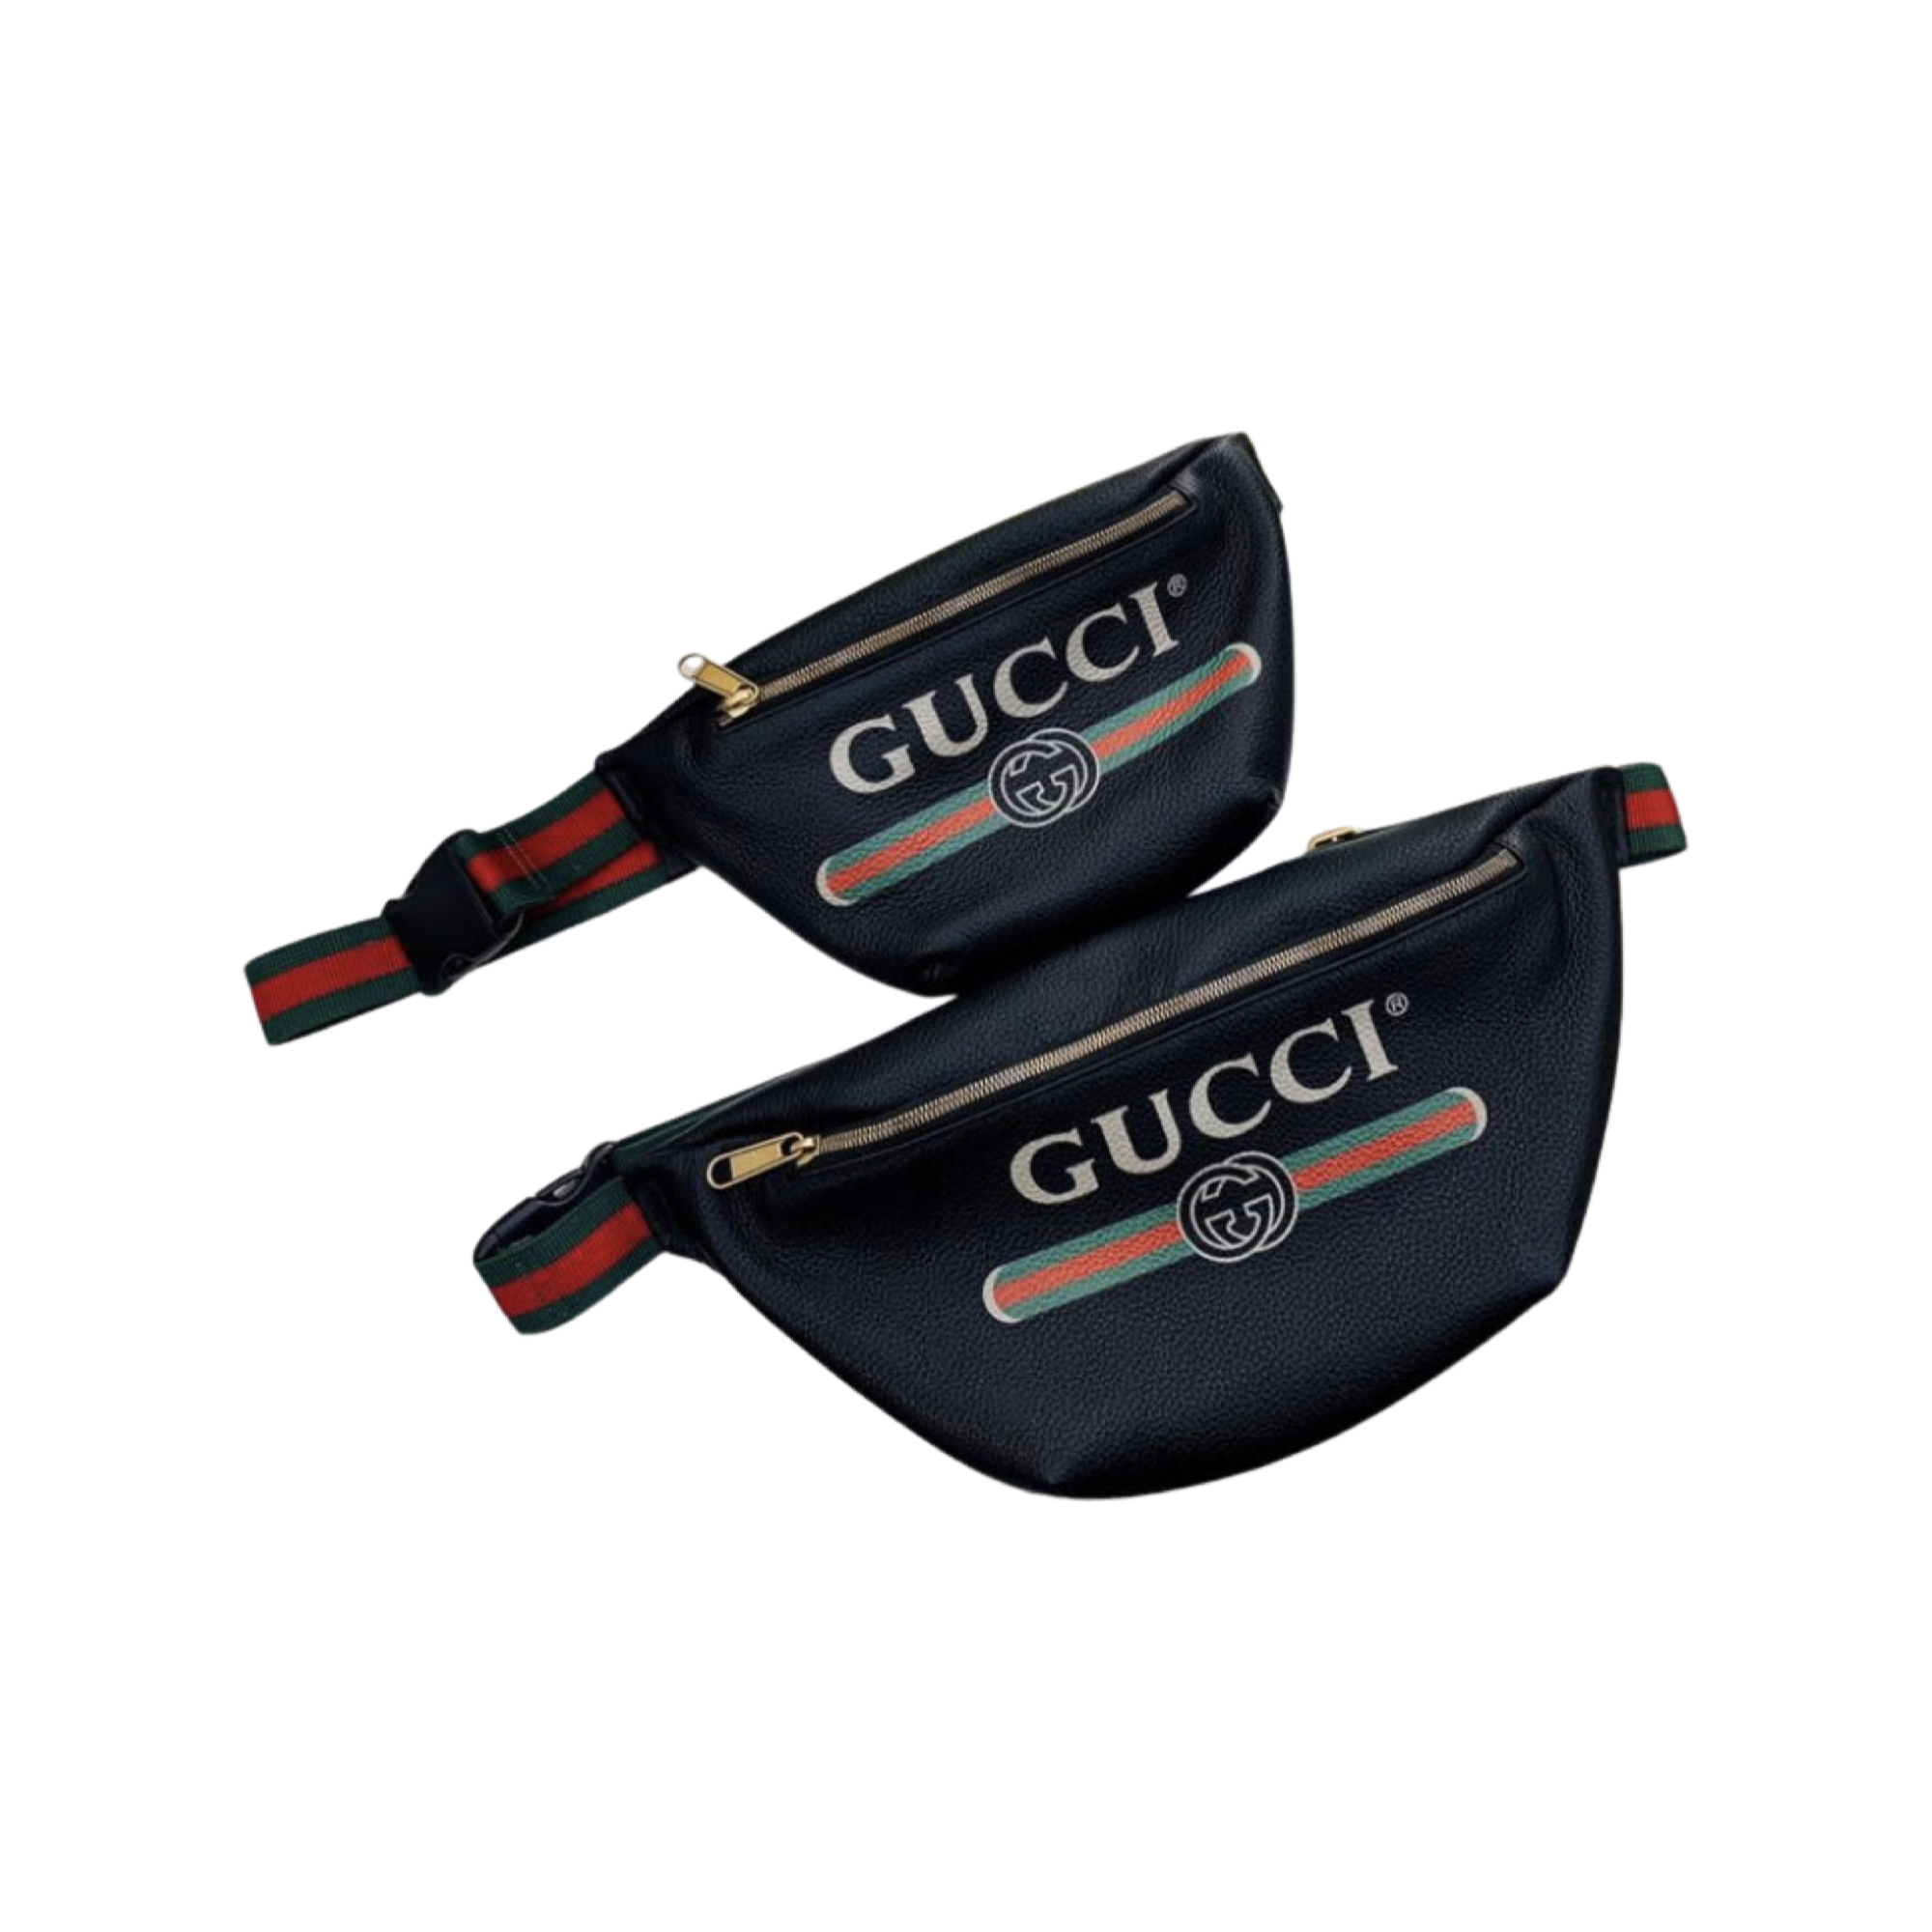 Luxury Gucc Fanny Pack